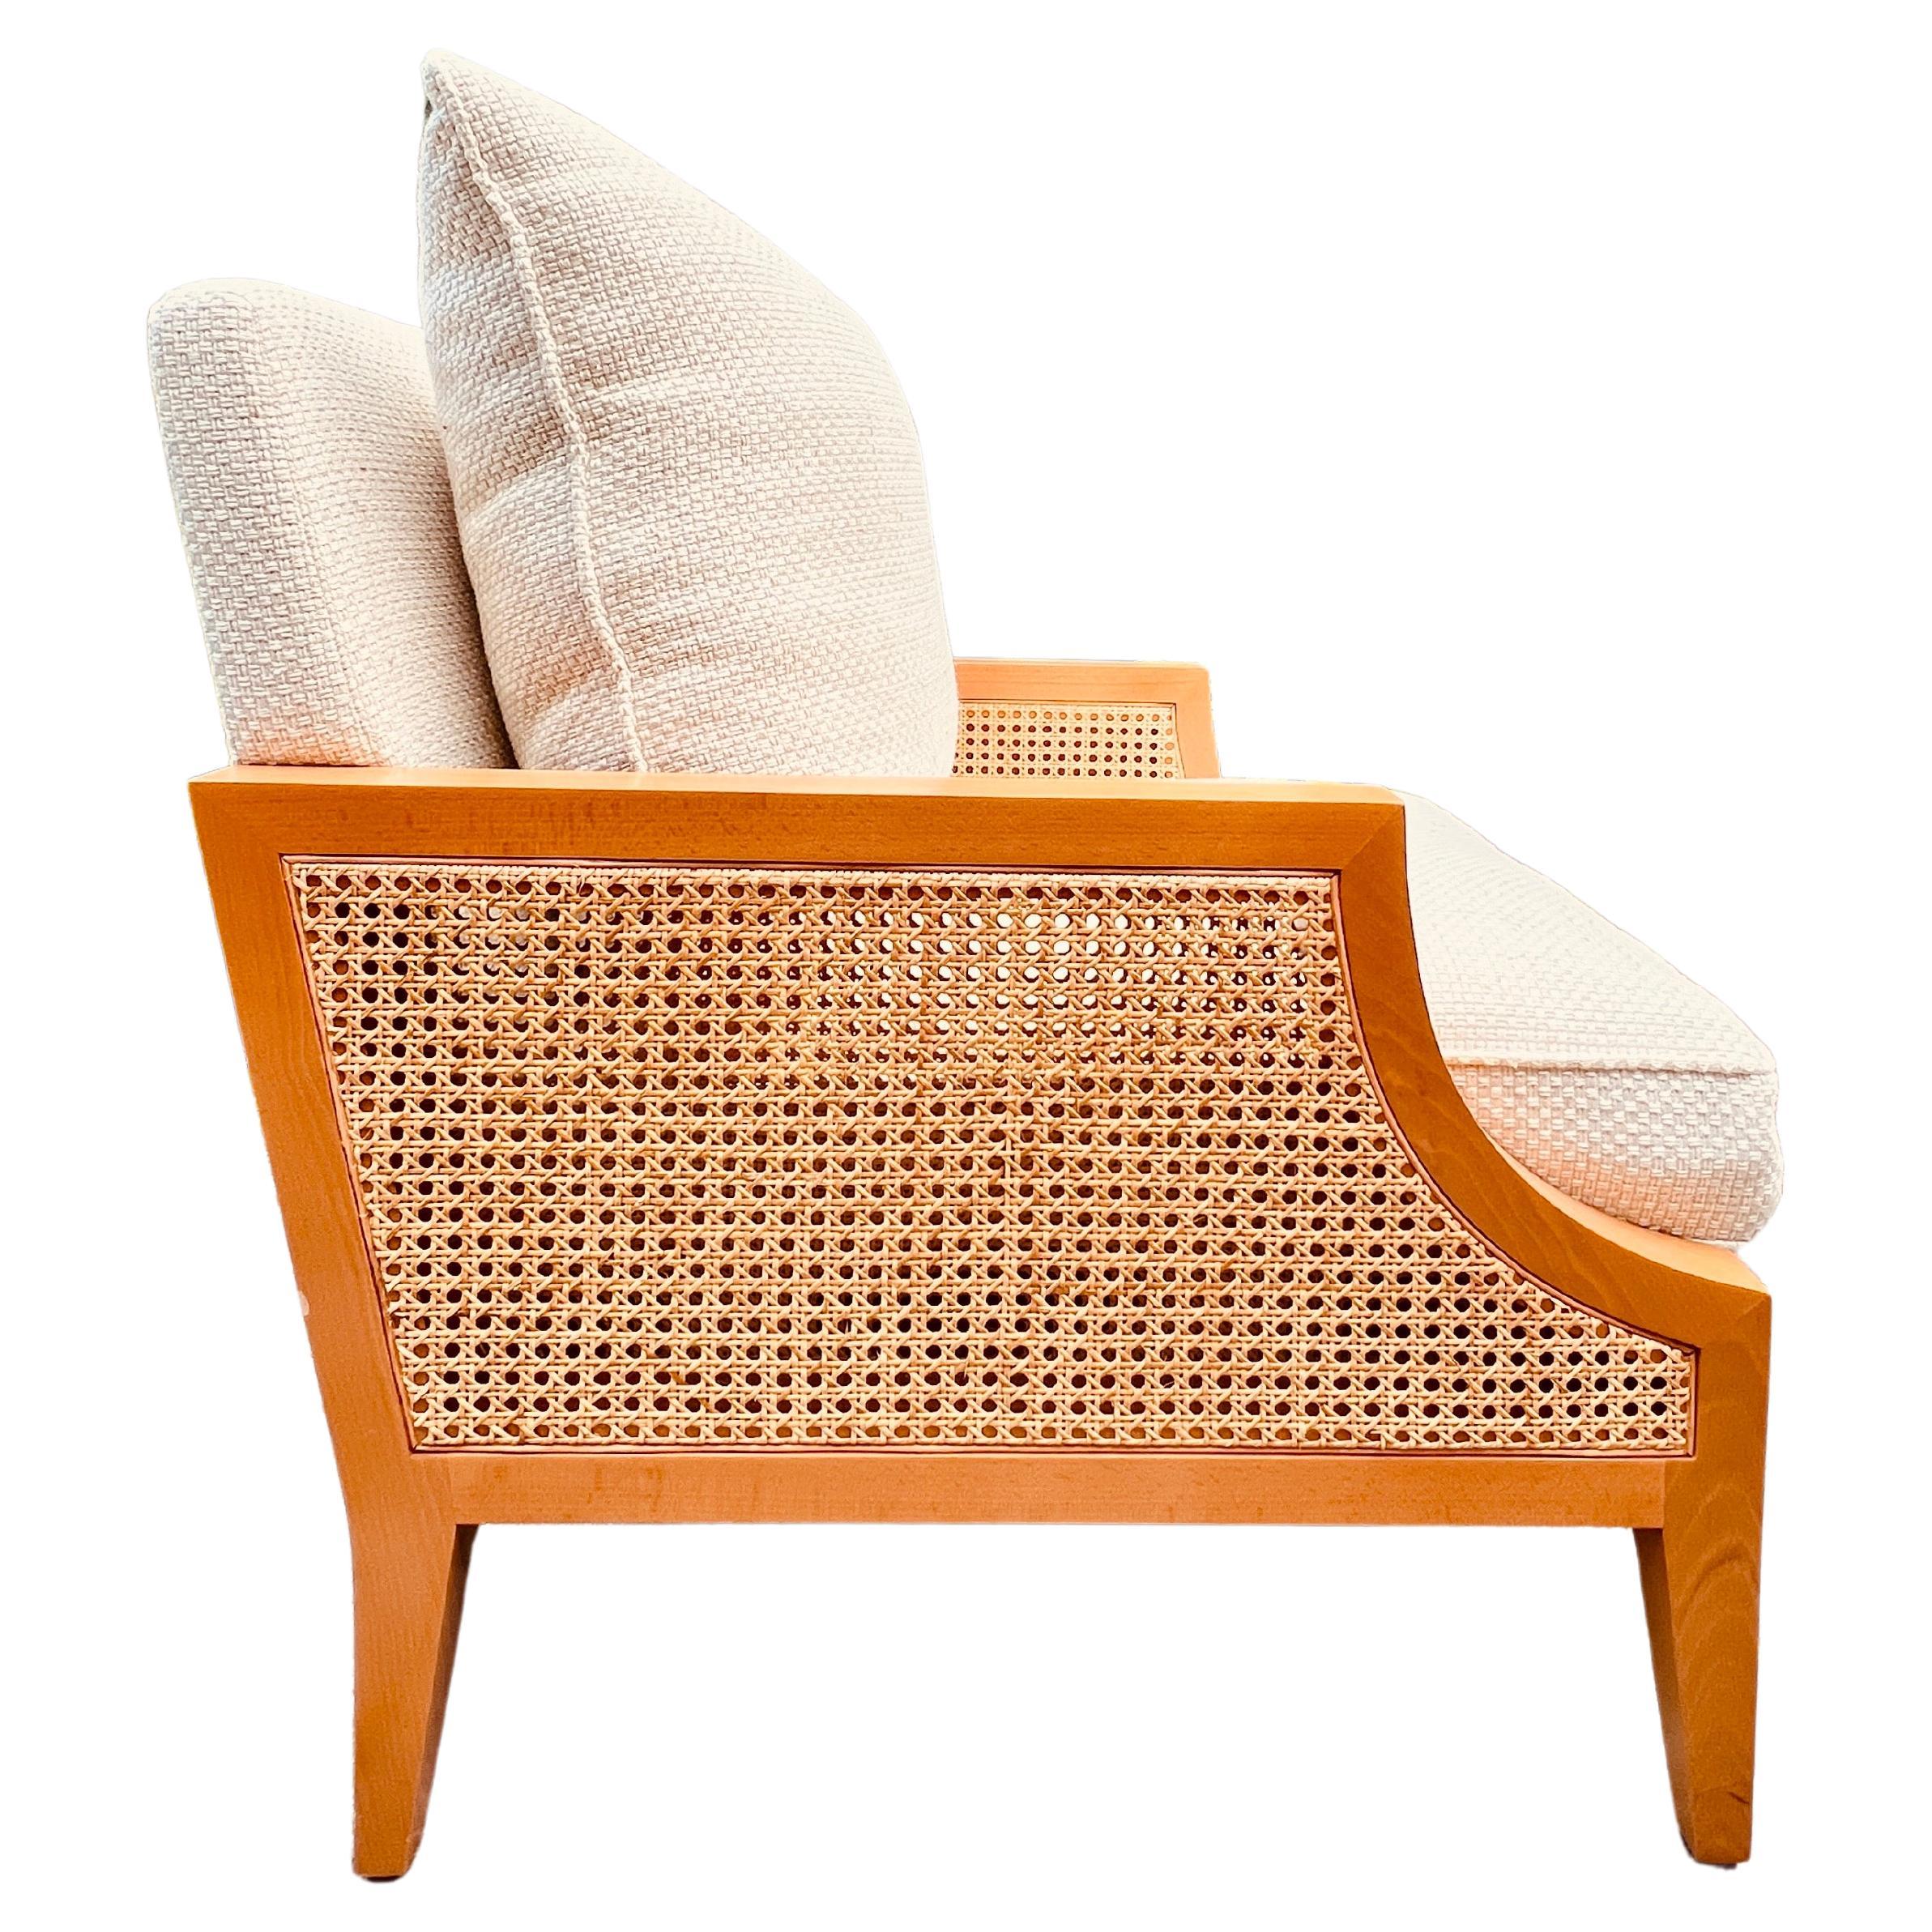 Cane and Beechwood Lounge Chair in Ivory Basketweave by Pierre Frey